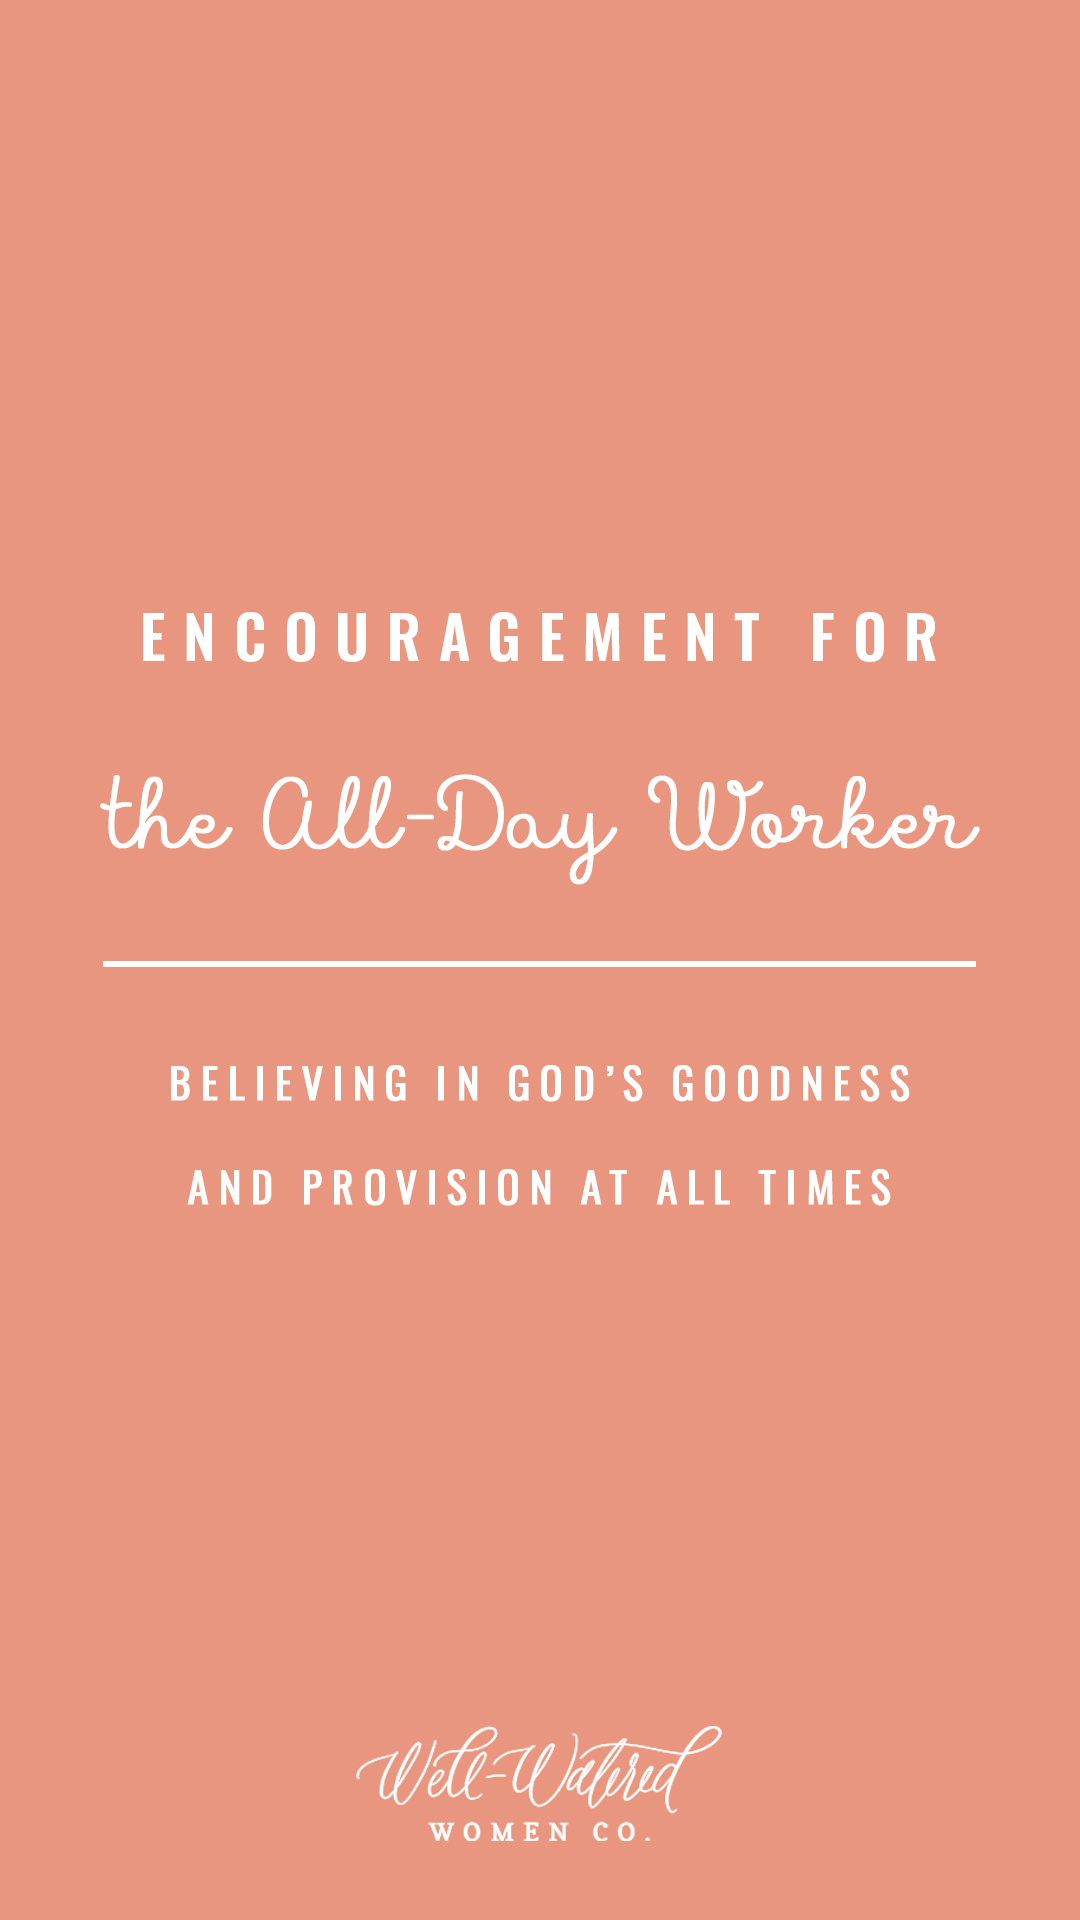 Well Watered Women Blog | Encouragement for the All-Day Worker